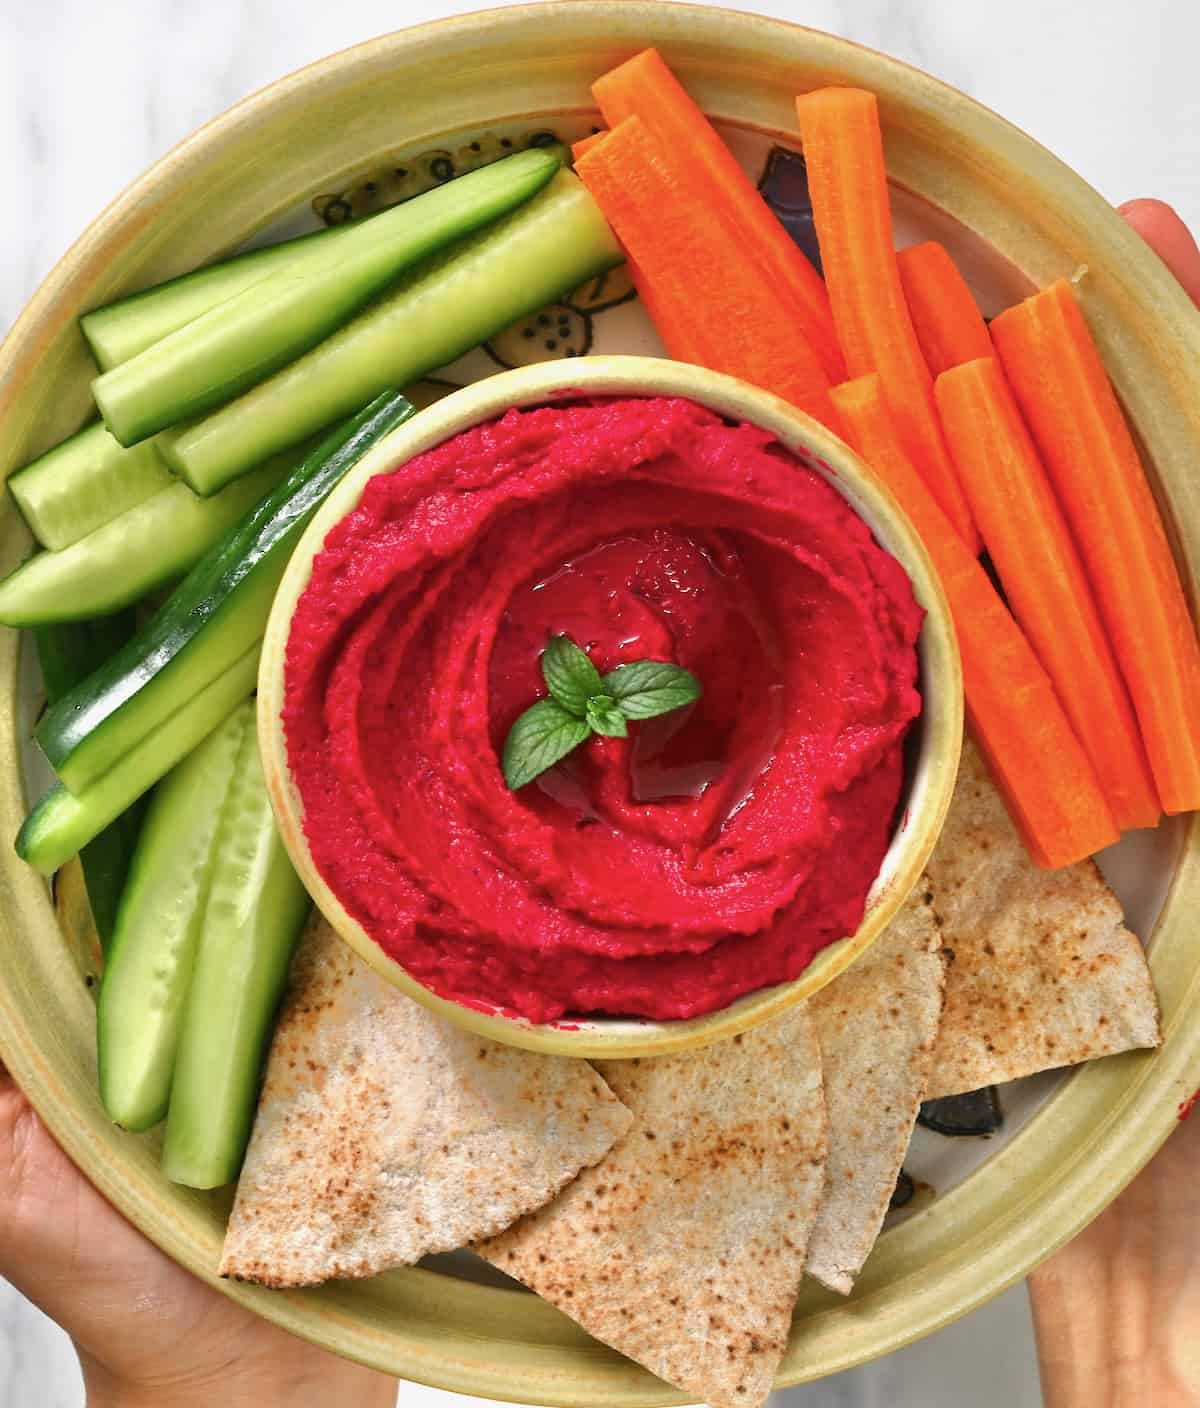 Homemade roasted beet hummus served with carrot and cucumber sticks and pita chips